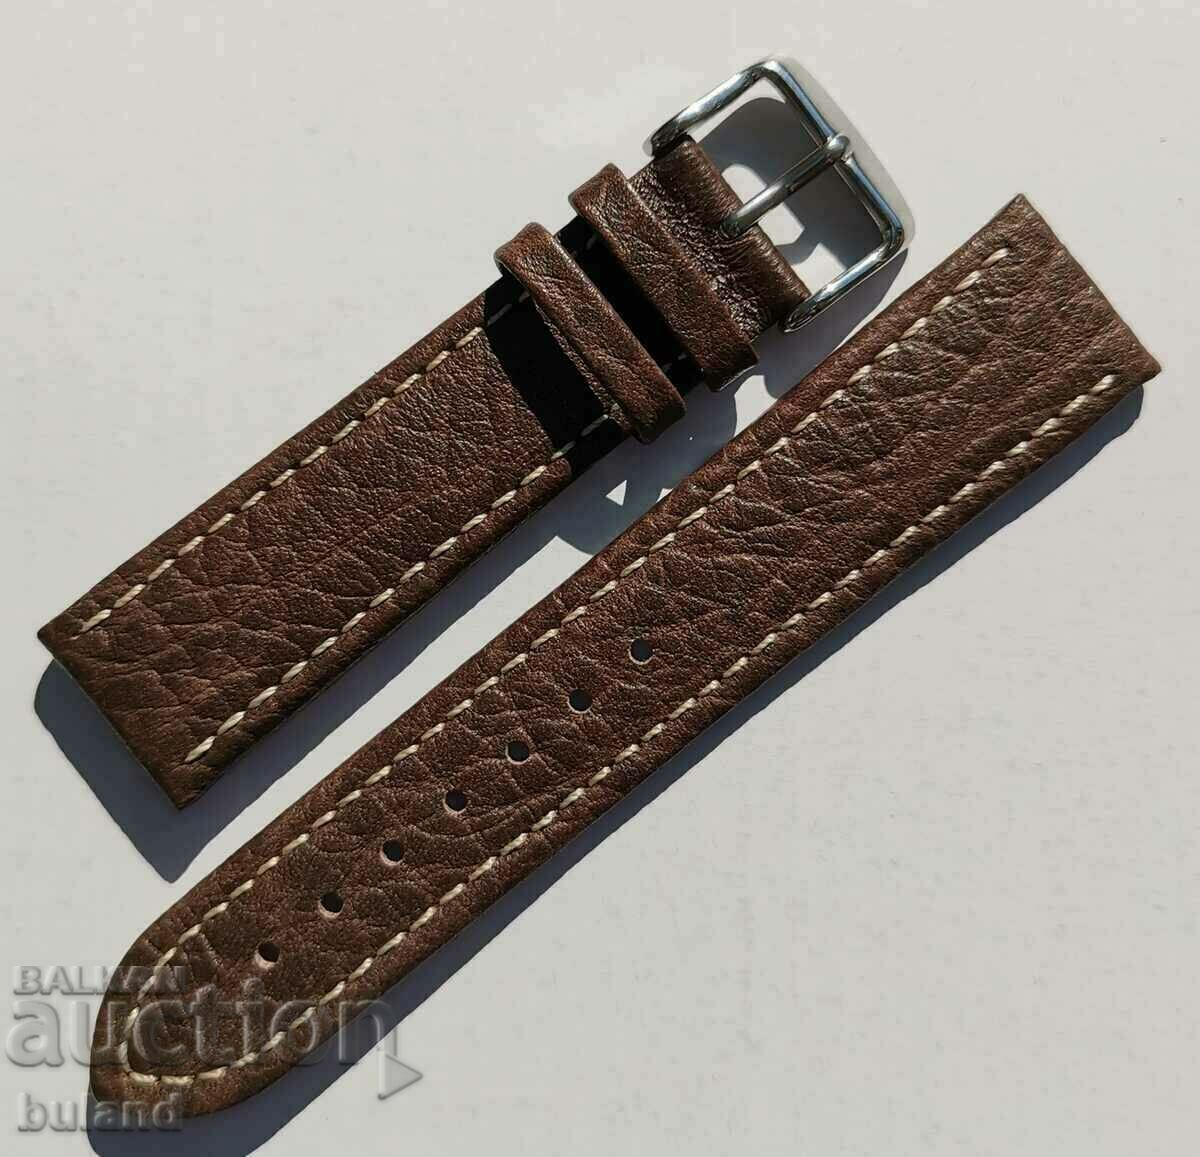 New Condor Brown Leather French Strap 20mm Condor